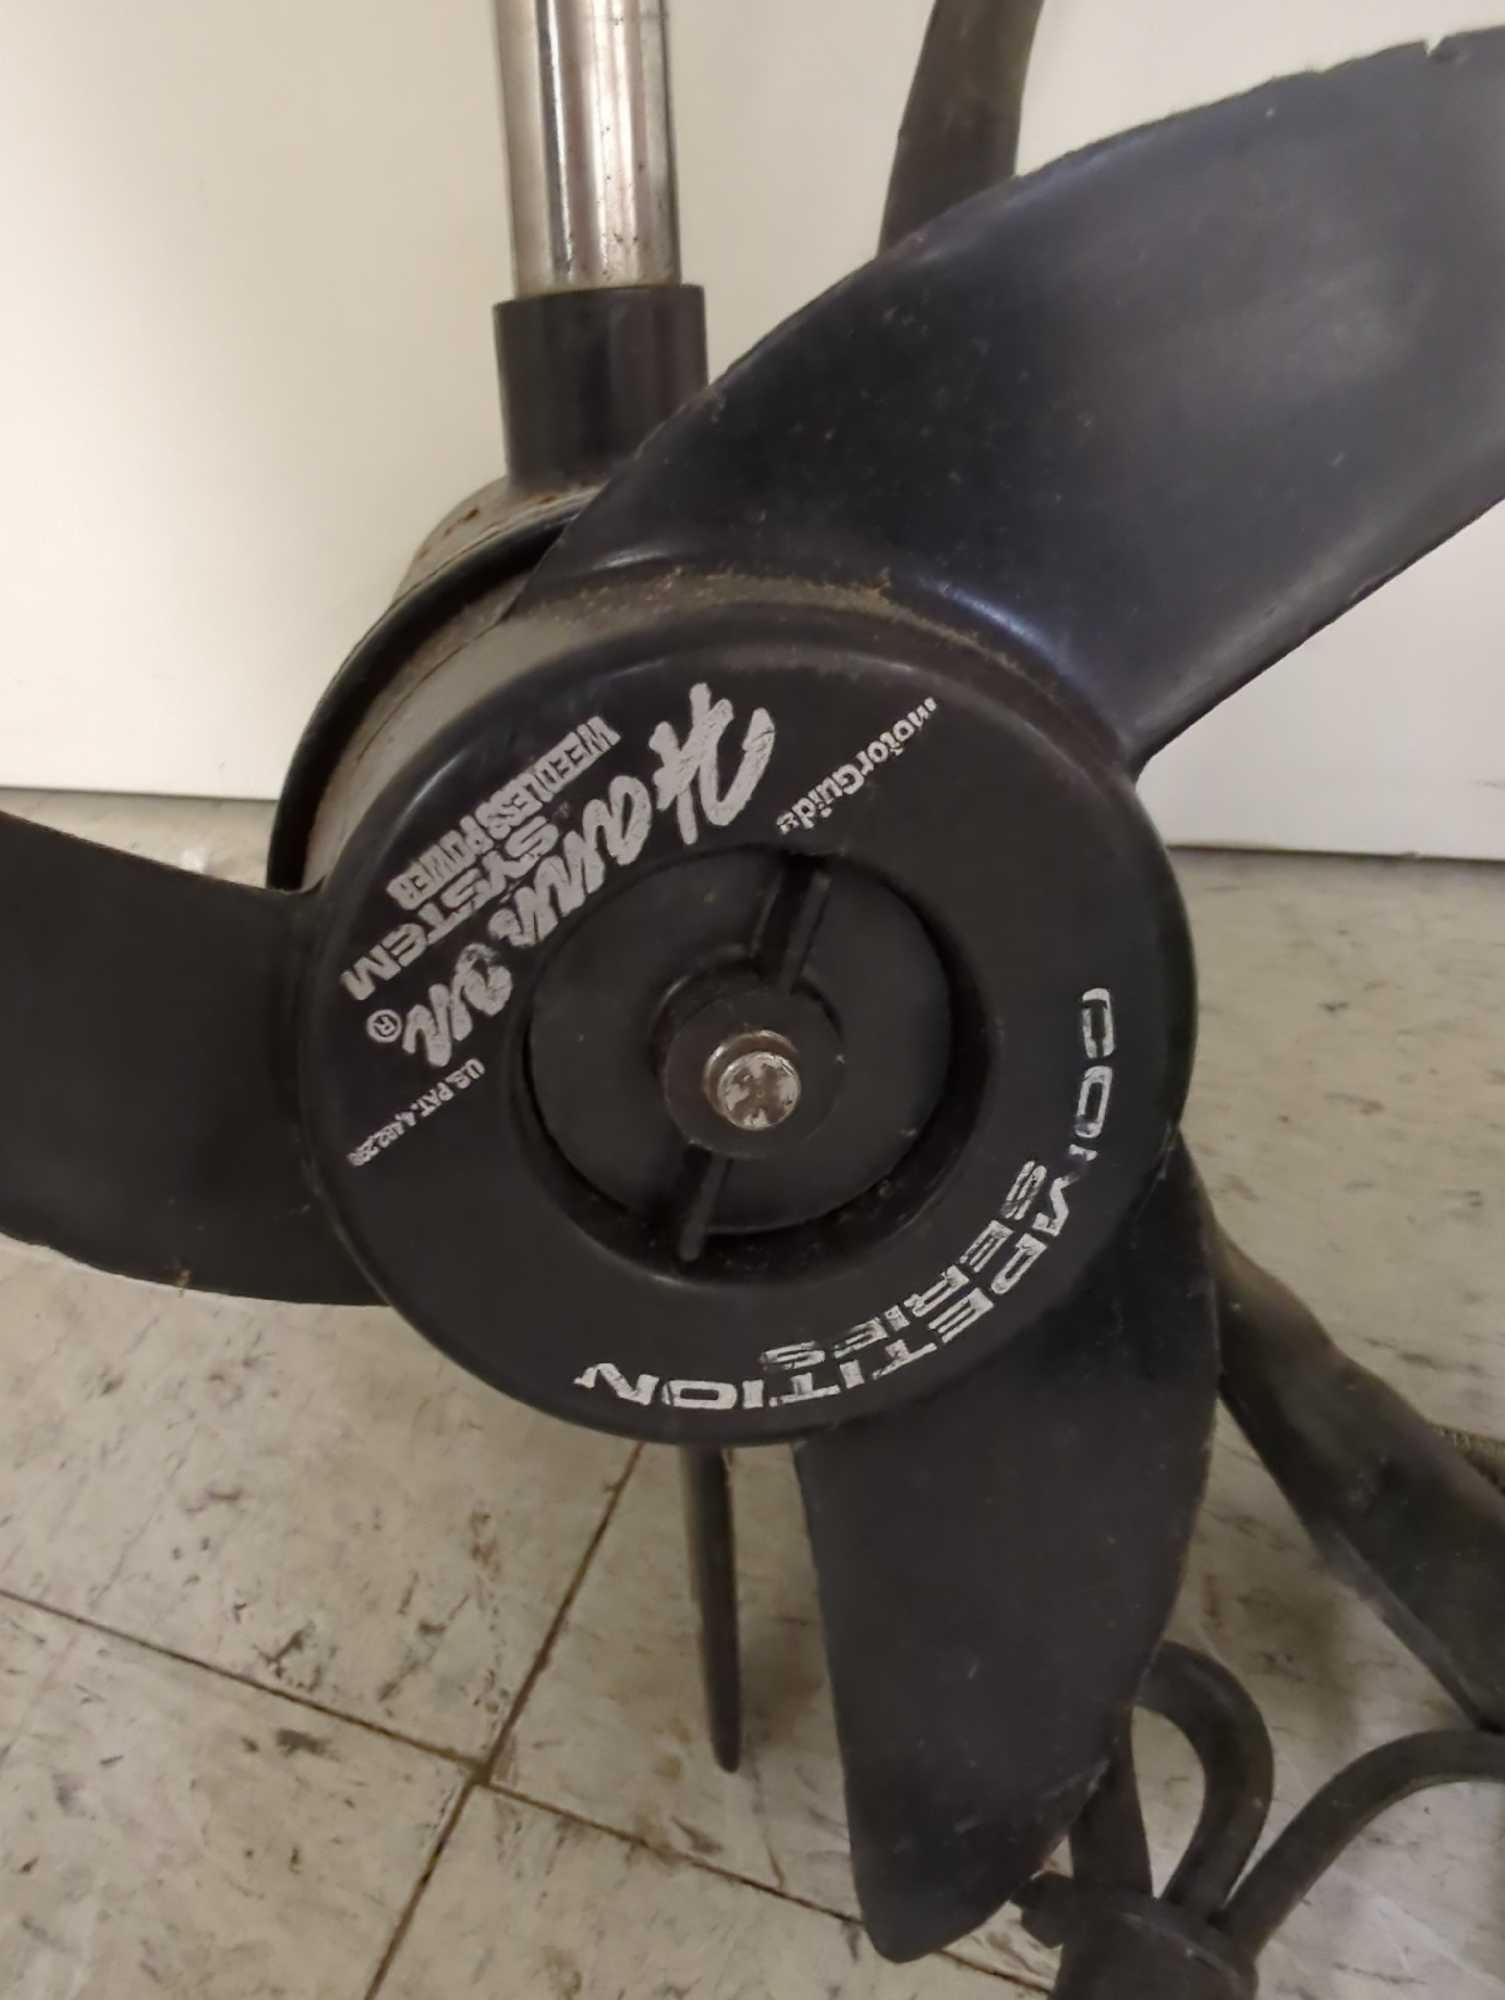 MotorGuide Tour Trolling motor. Comes as is shown in photos. Appears to be used.